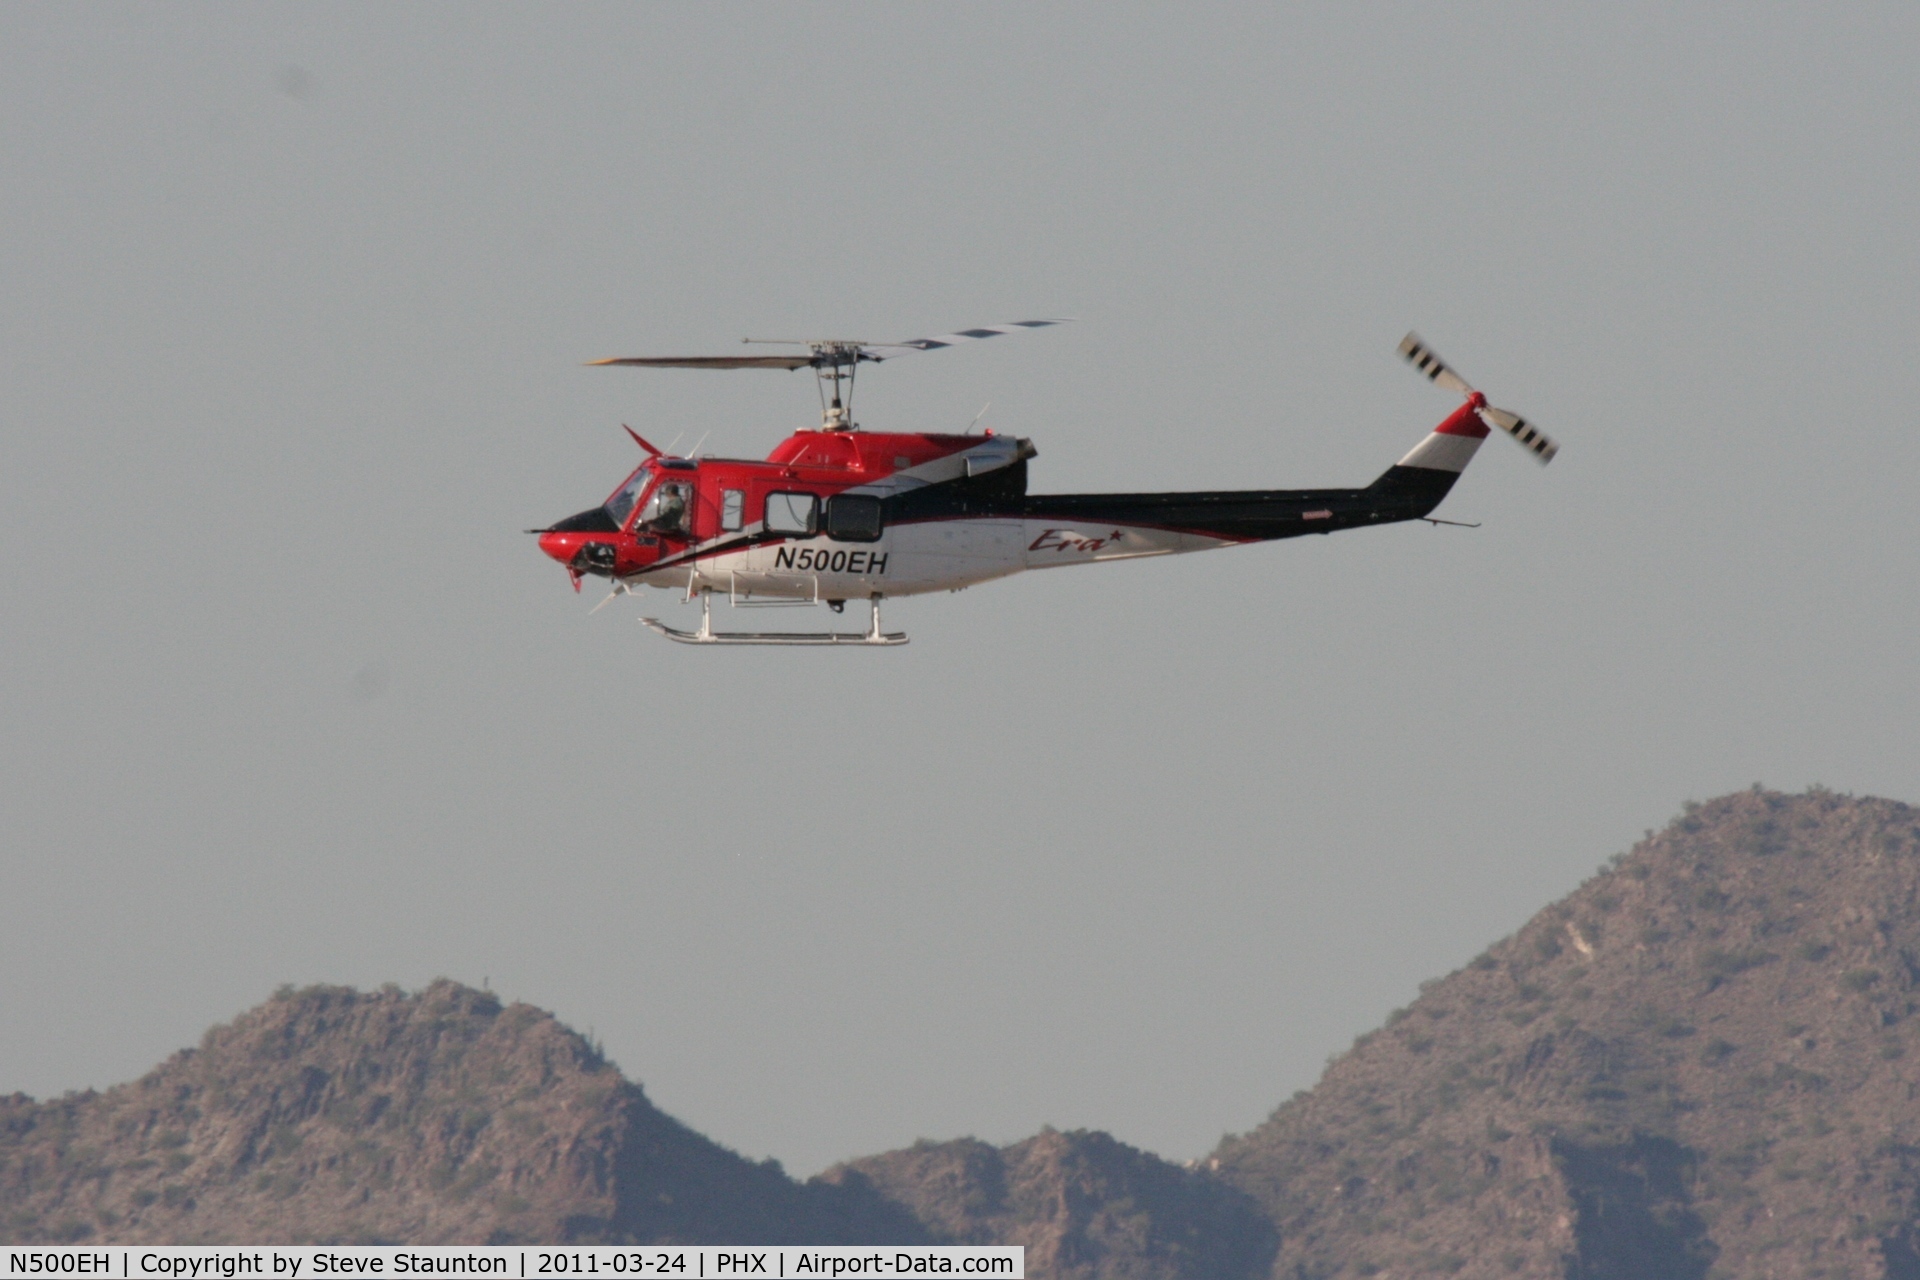 N500EH, Bell 212 C/N 30945, Taken at Phoenix Sky Harbor Airport, in March 2011 whilst on an Aeroprint Aviation tour